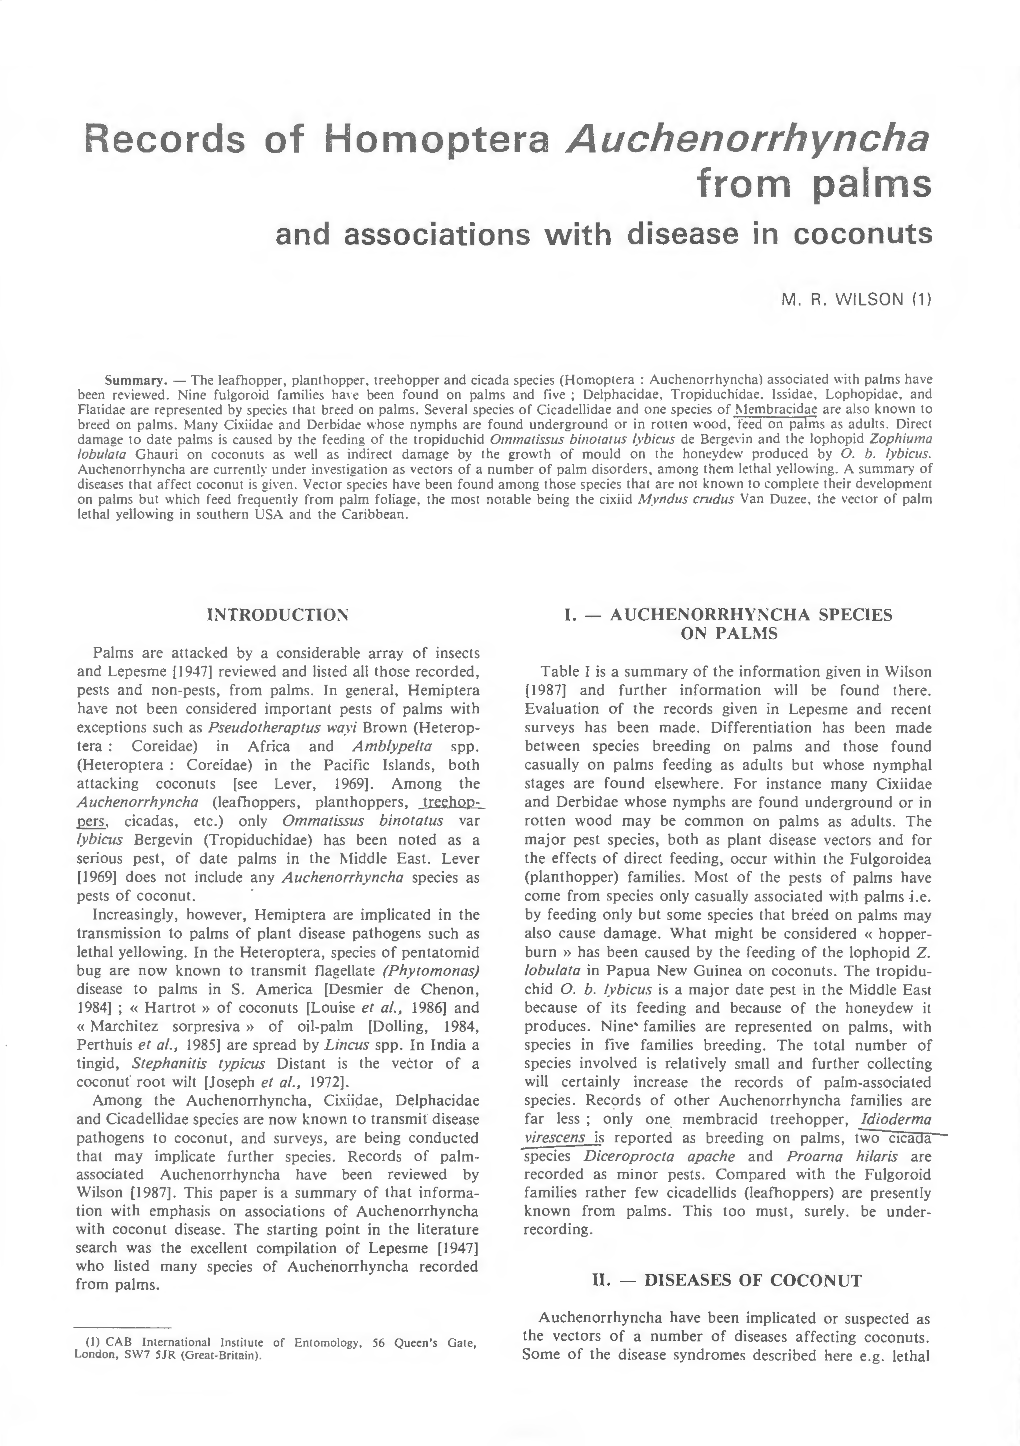 From Palms and Associations with Disease in Coconuts